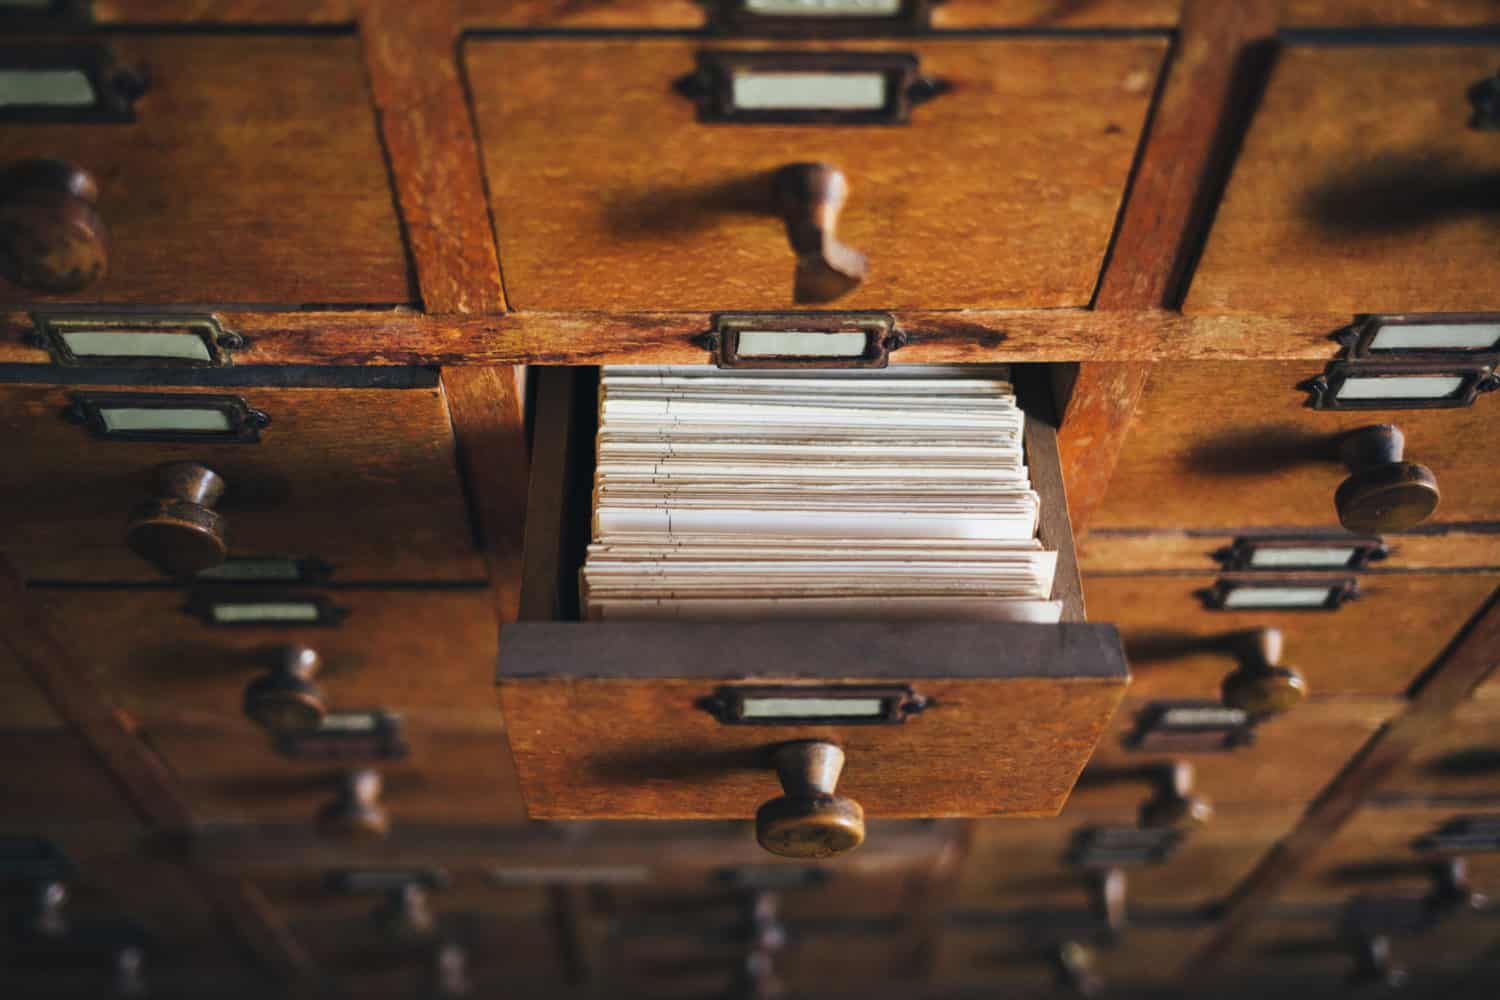 An open drawer in a wooden card catalog case shows the tops of cards